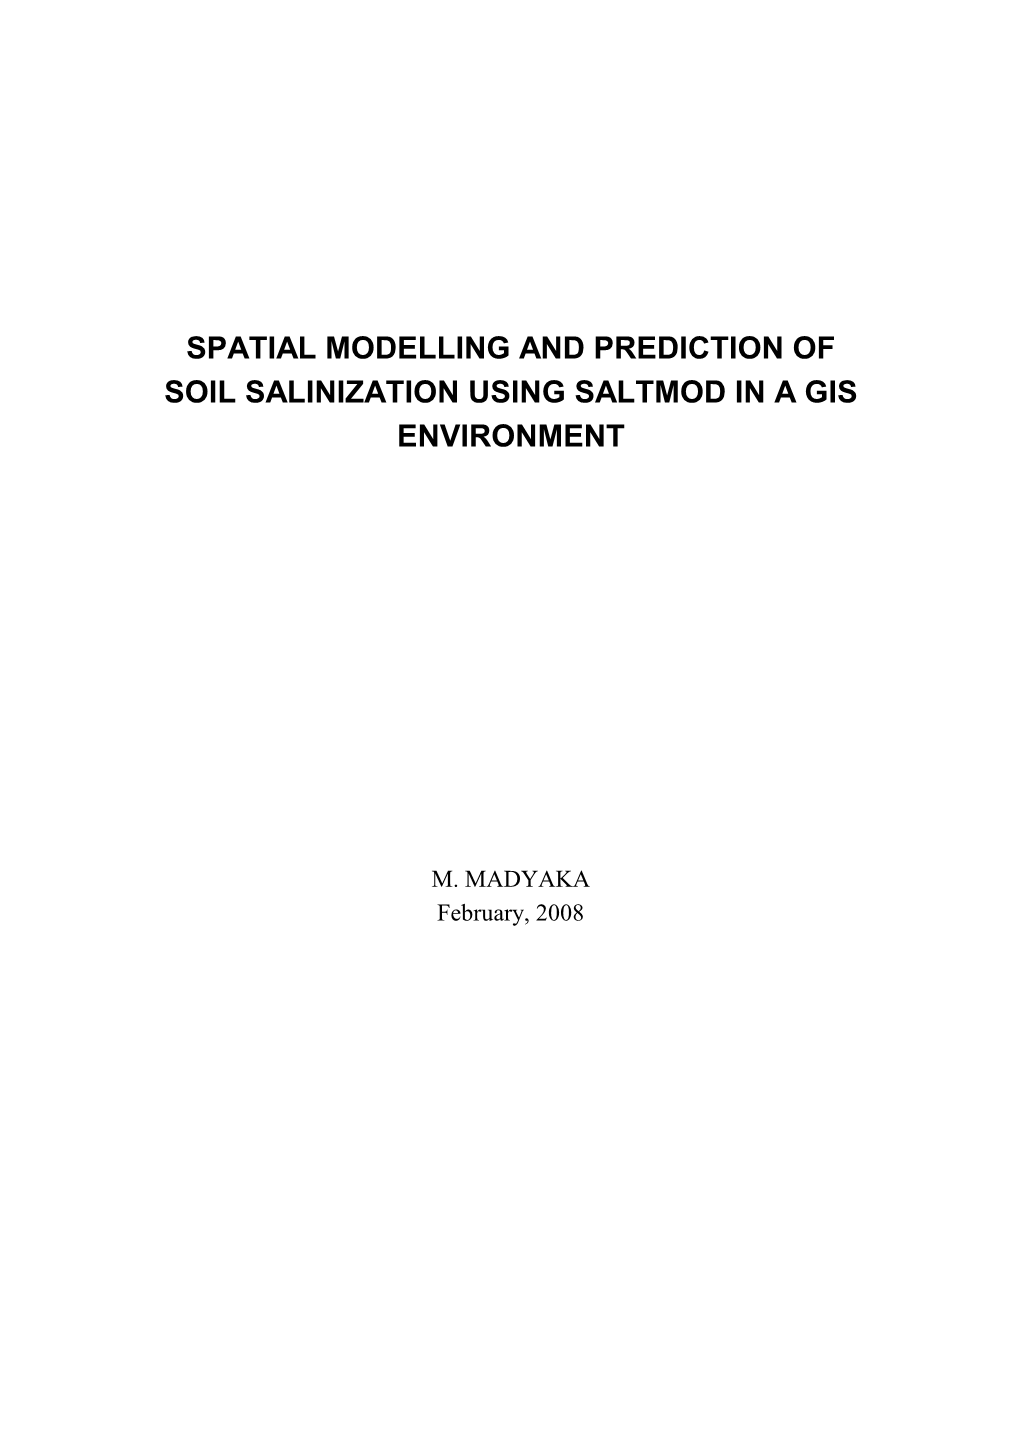 Spatial Modelling and Prediction of Soil Salinization Using Saltmod in a Gis Environment